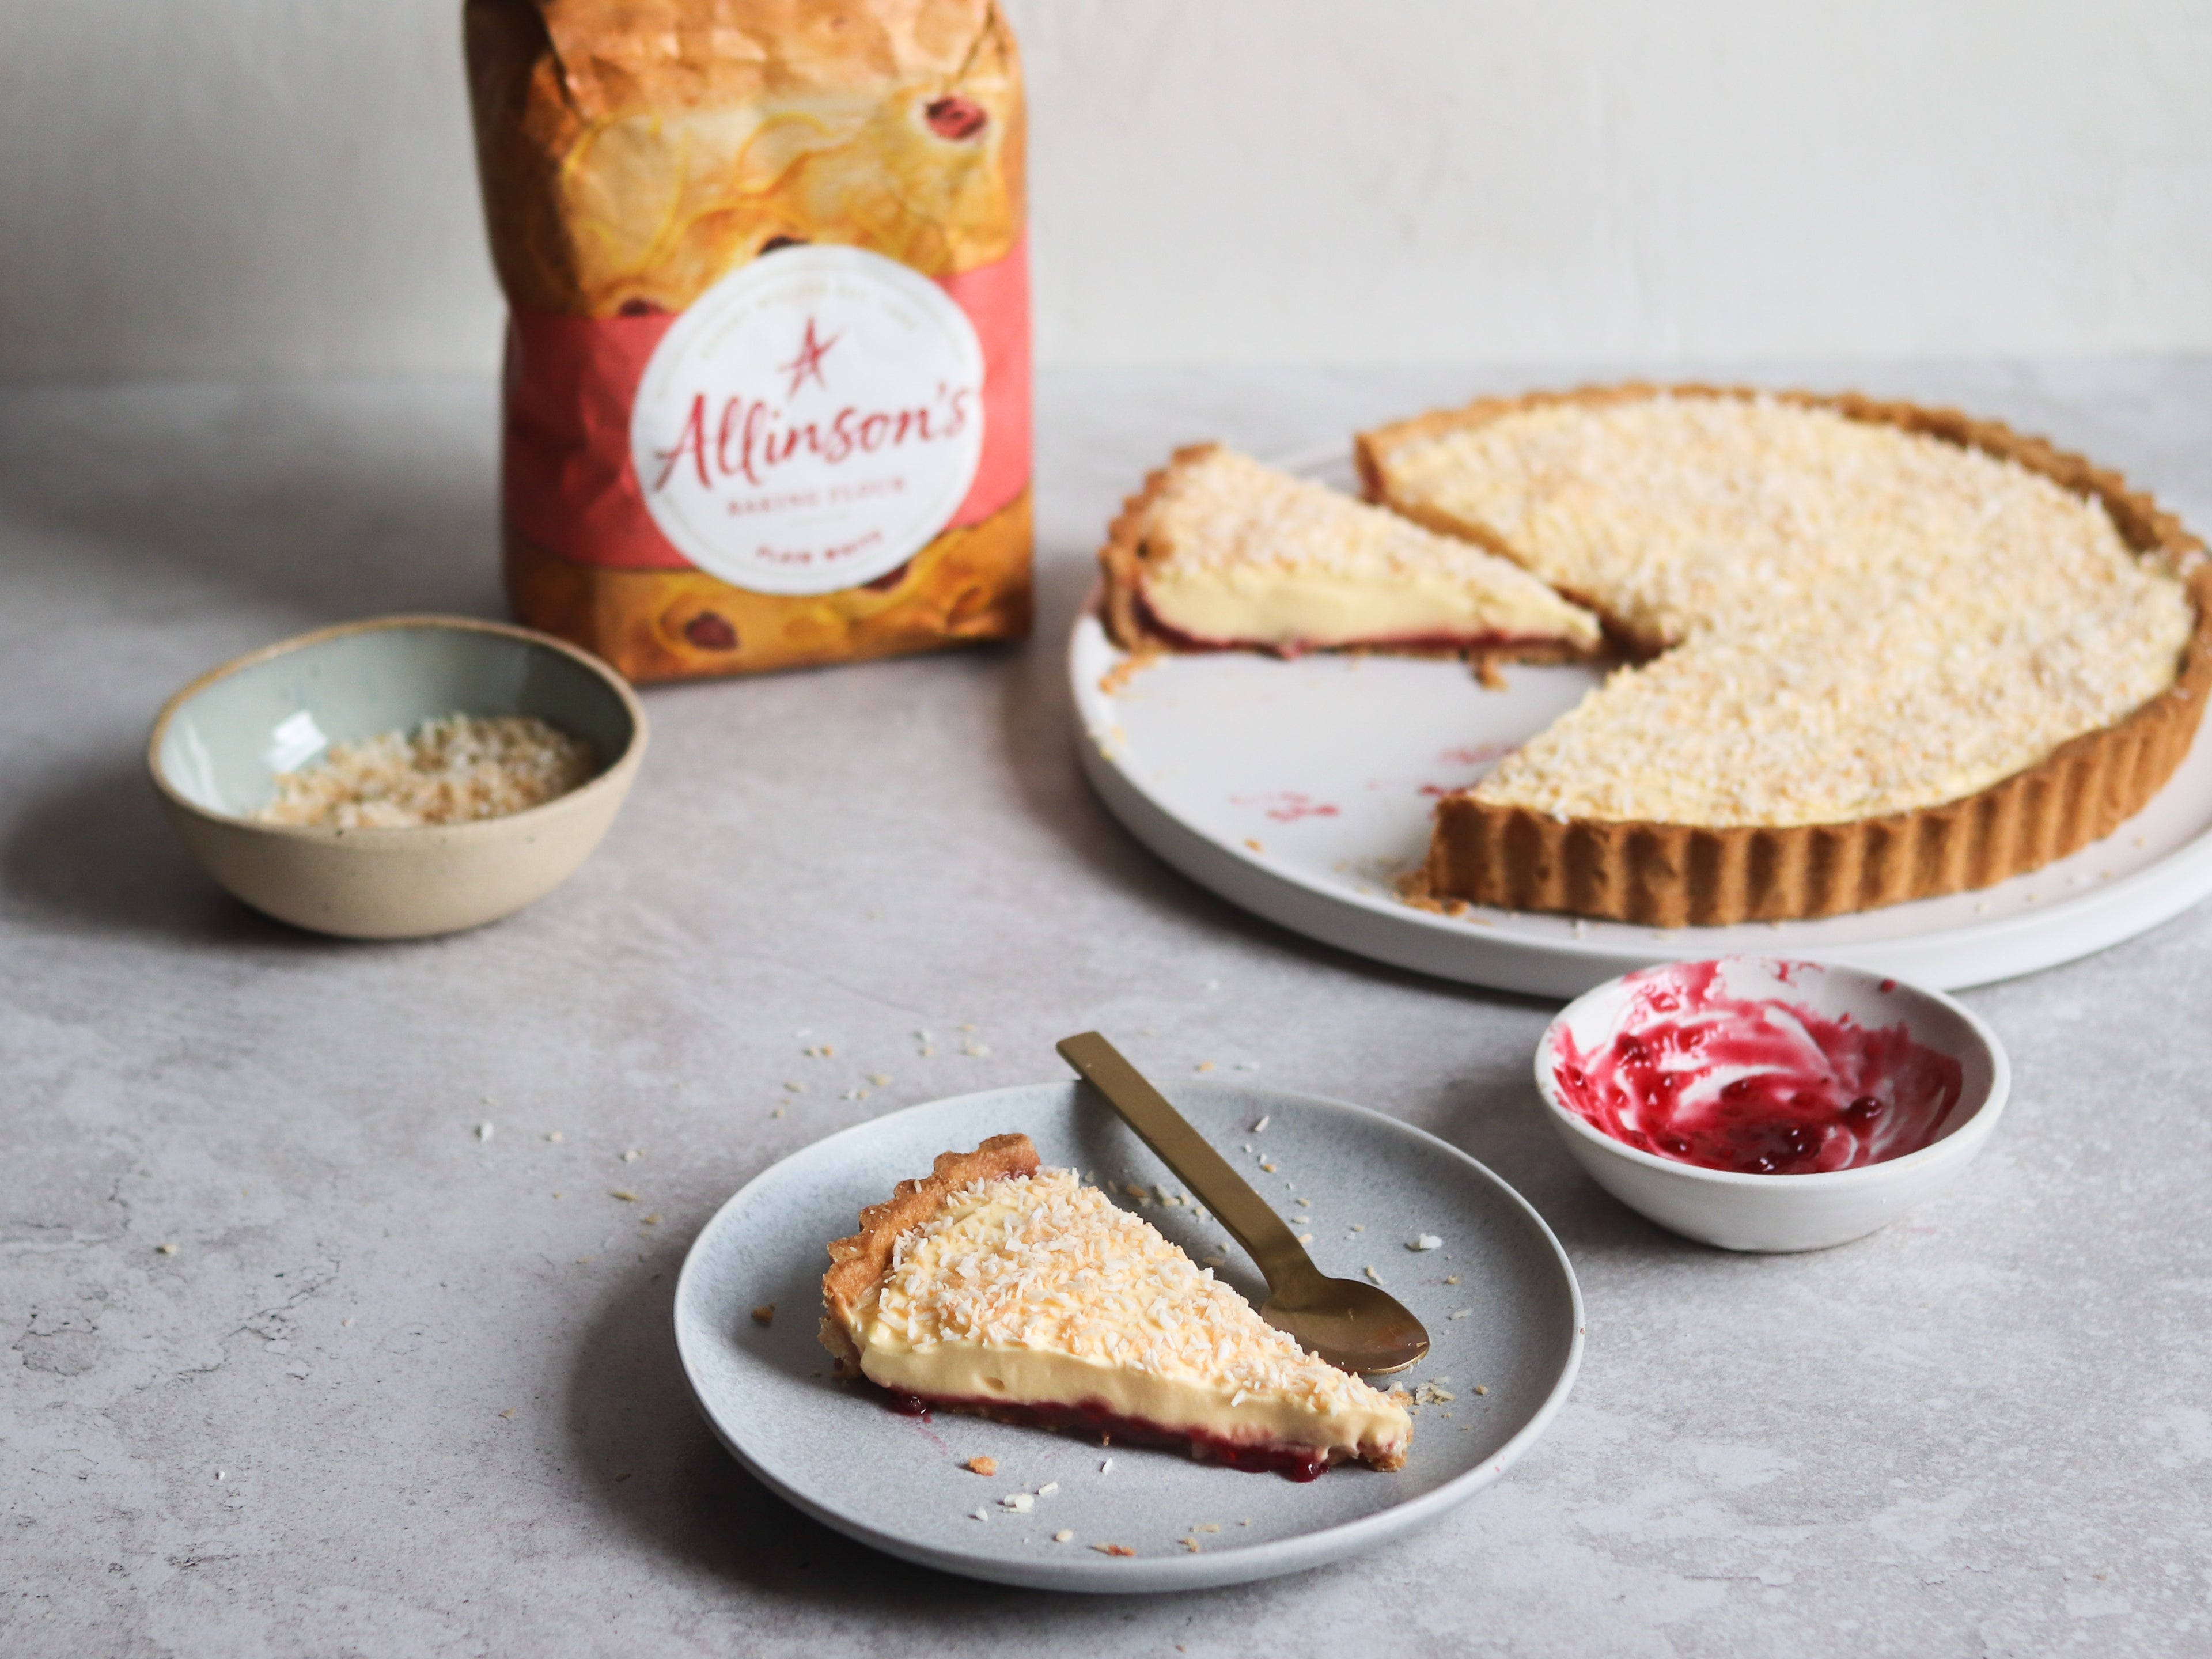 A plate with a slice of Manchester Tart, with a spoon. In the background there is a Manchester Tart with slices cut out of it and a bag of Allinson's Plain Flour